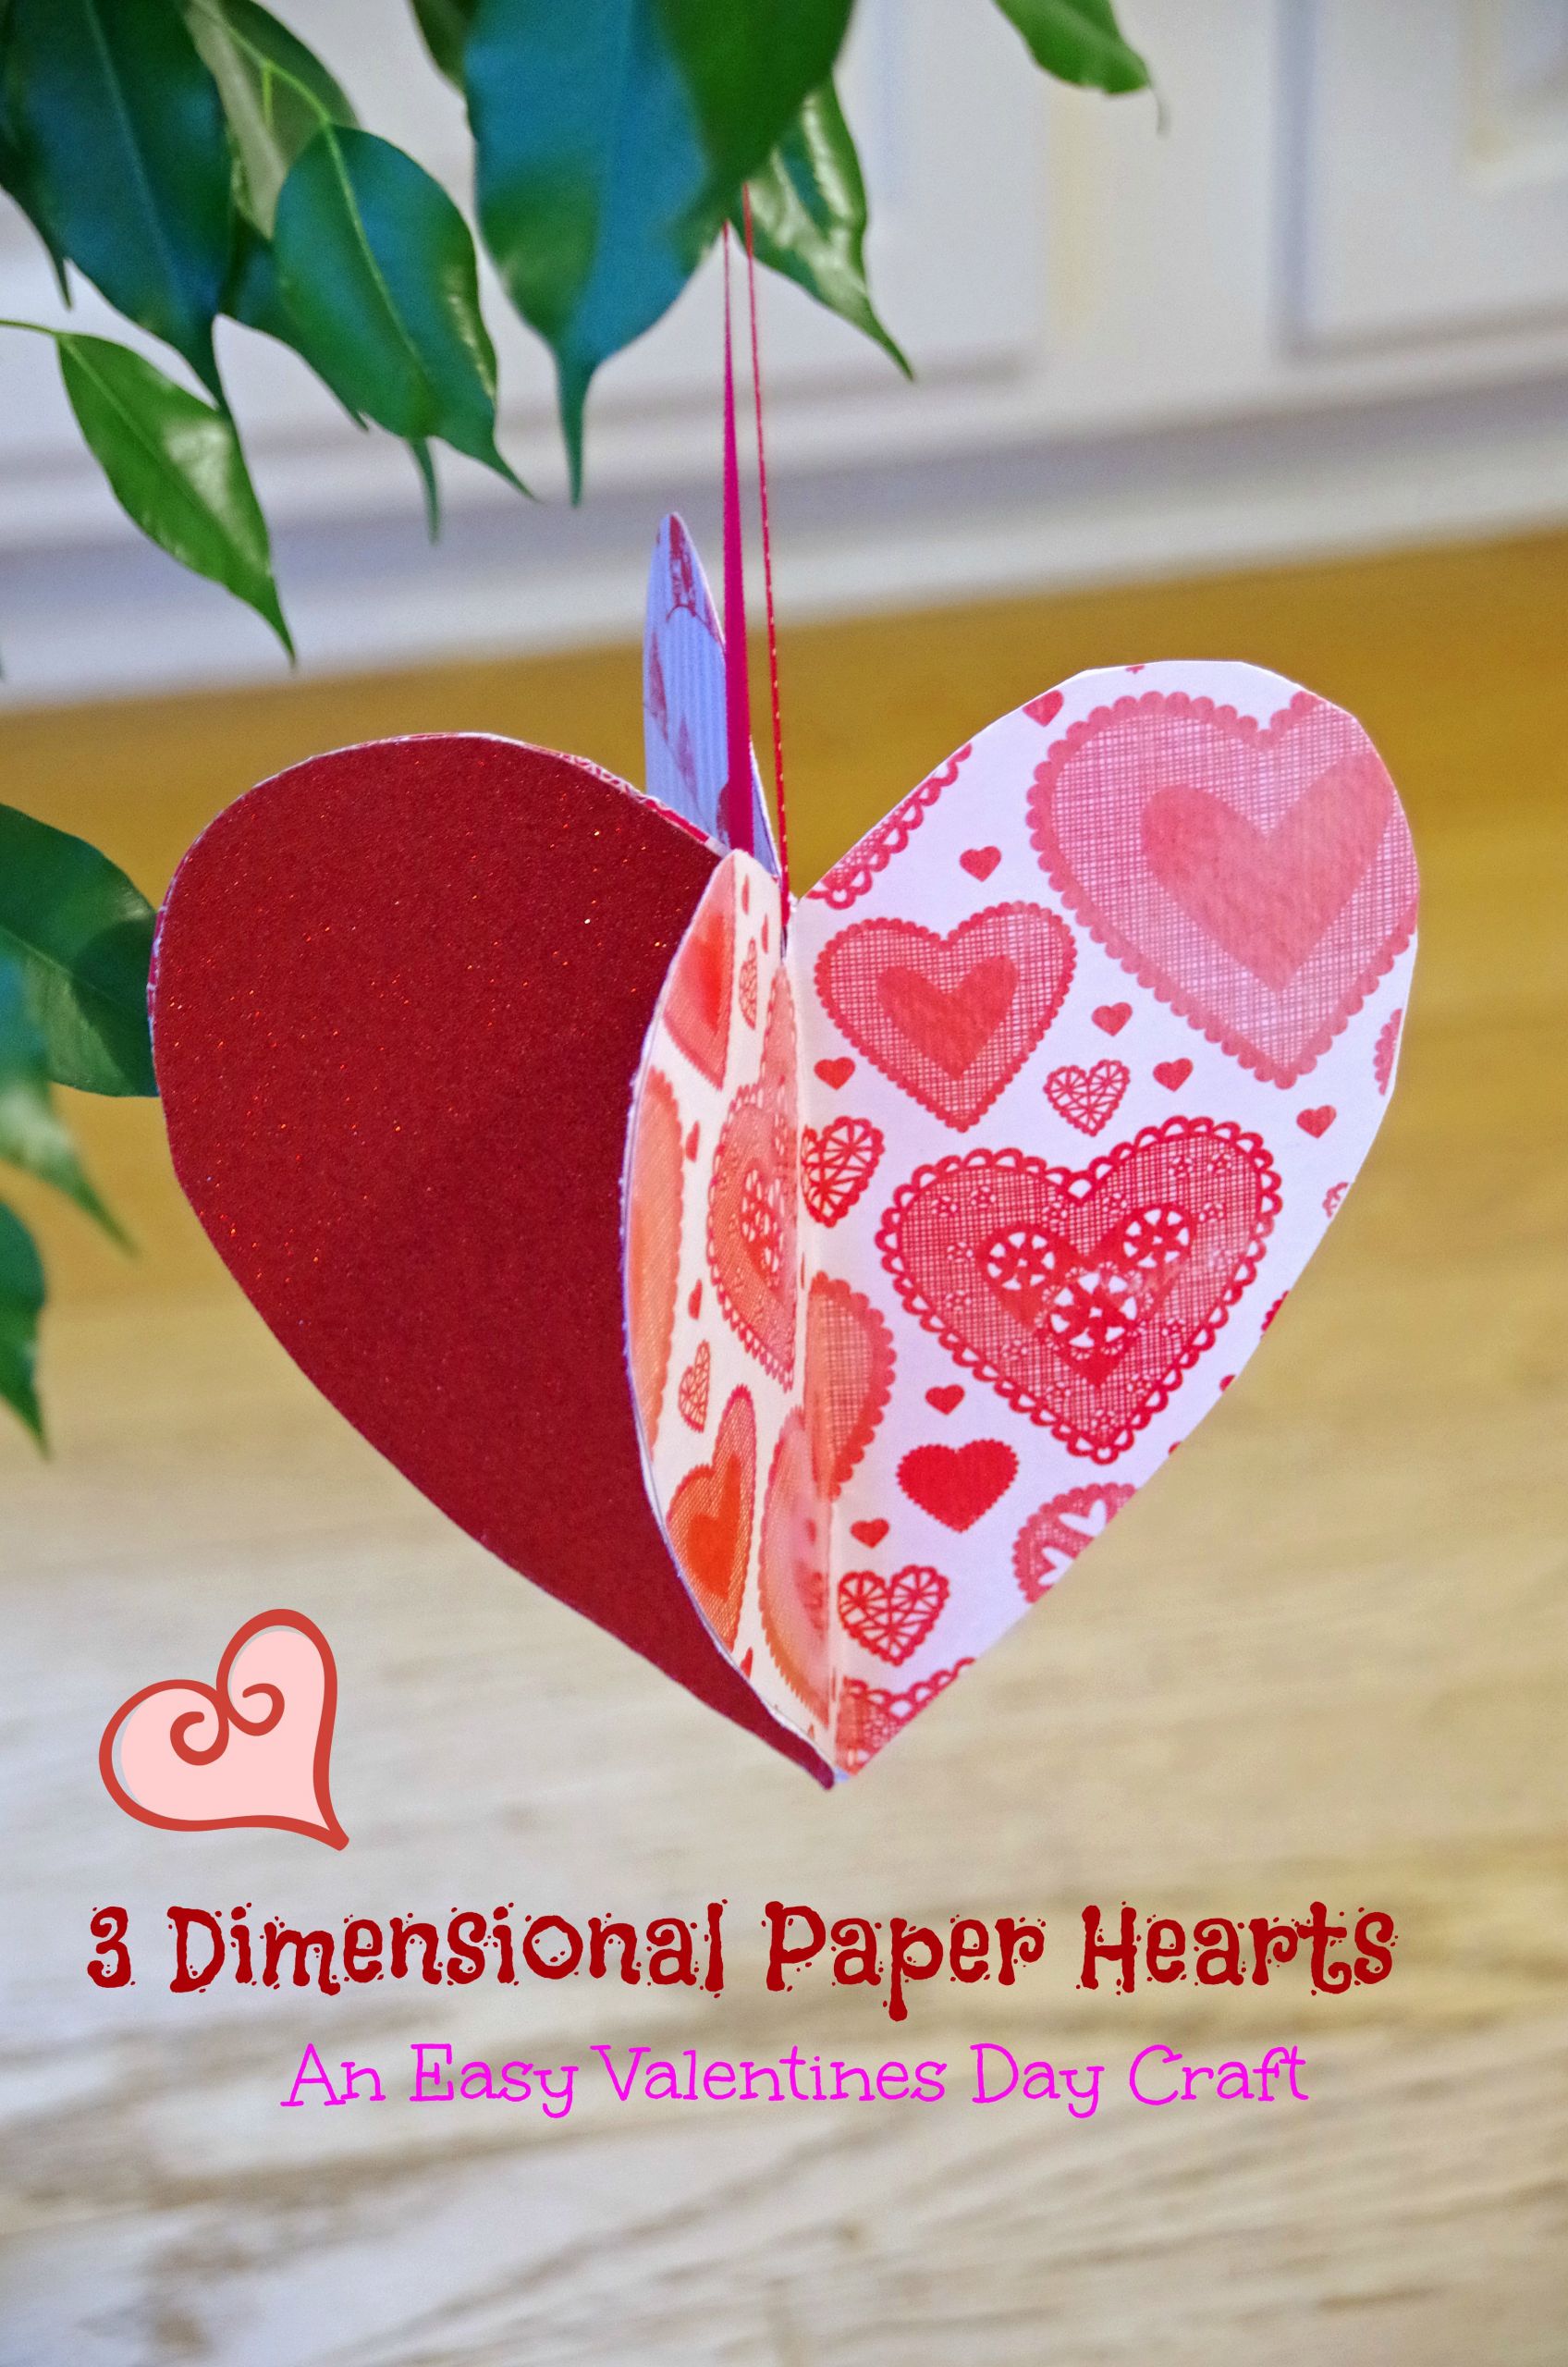 Valentines Craft Ideas For Toddlers
 Easy Valentines Day Craft Idea Make 3D Paper Hearts